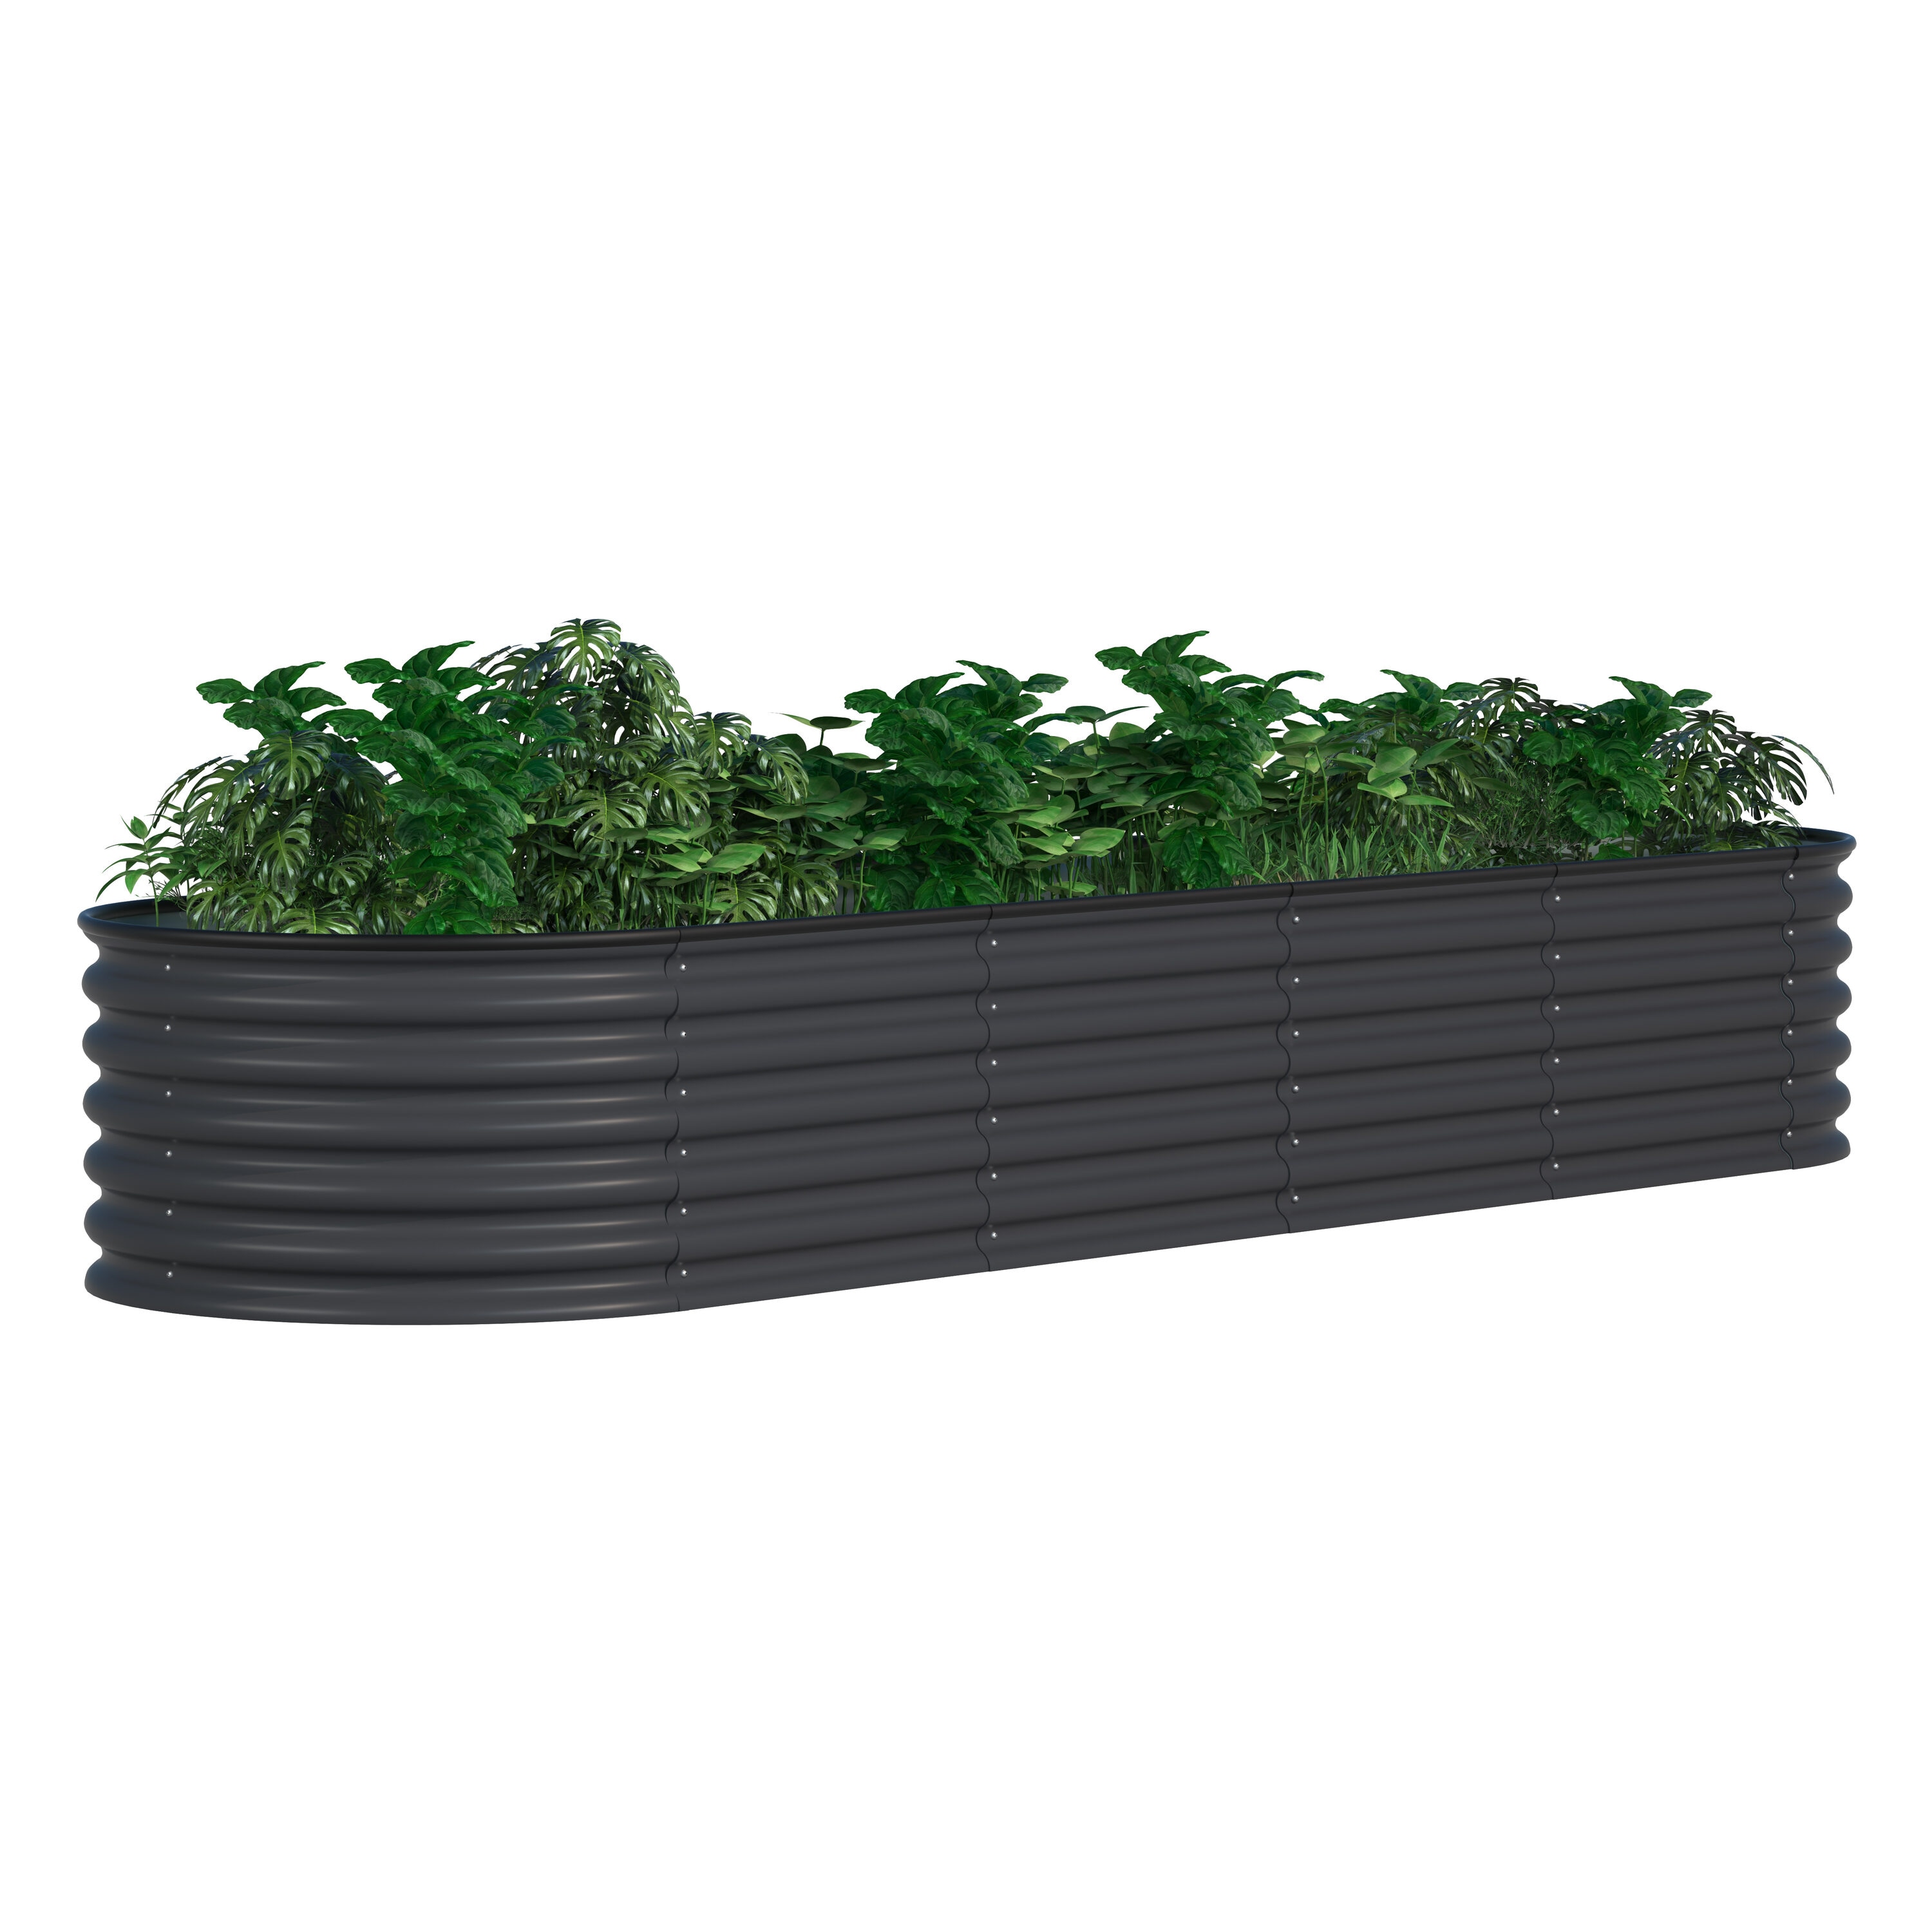 Best Choice Products 8x2x2ft Metal Raised Garden Bed, Oval Outdoor